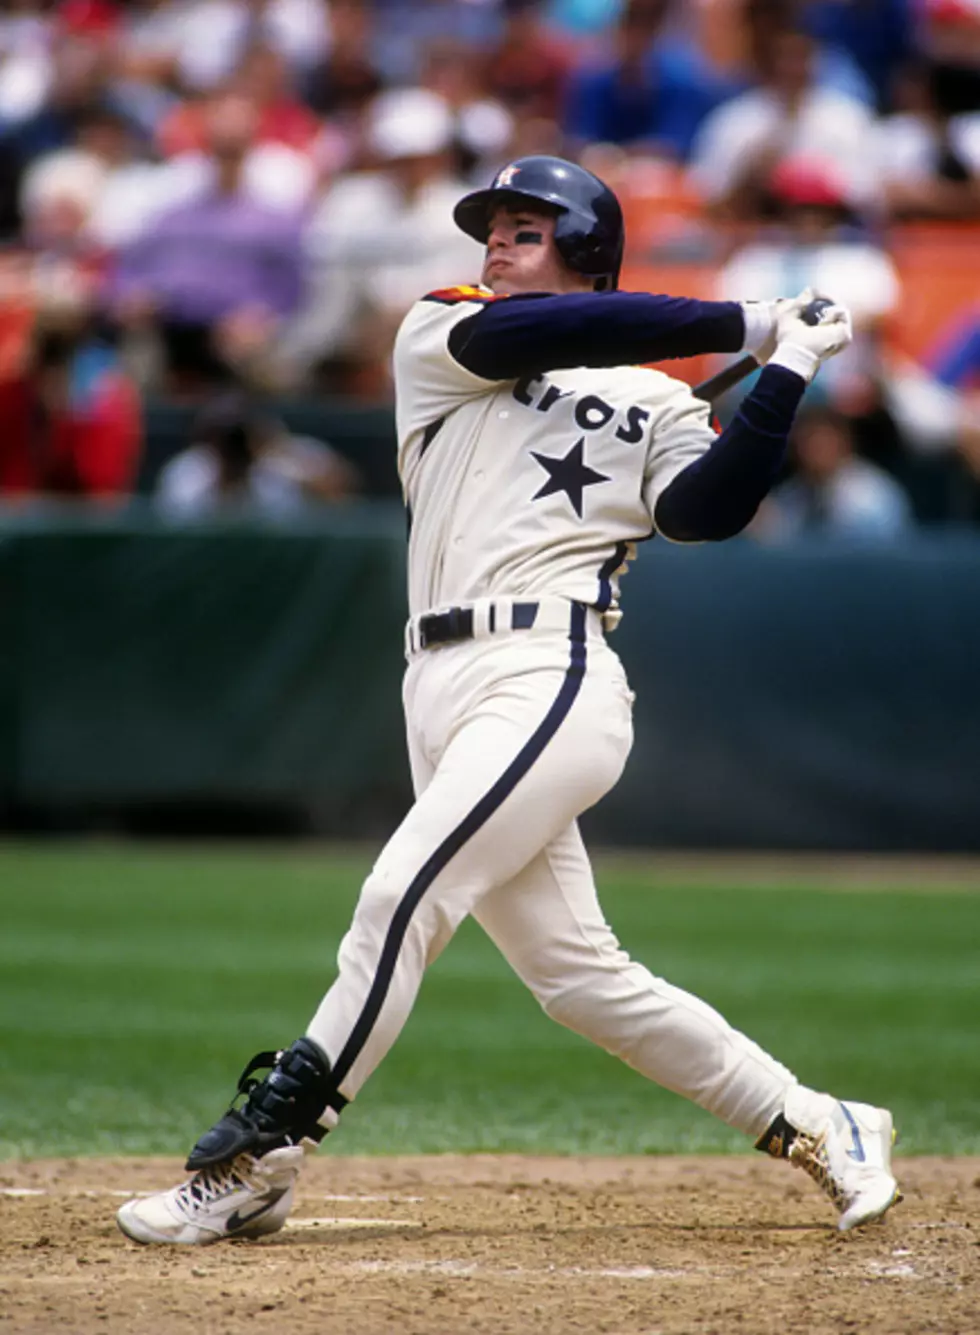 Jeff Bagwell's batting stance was a thing of wonder 